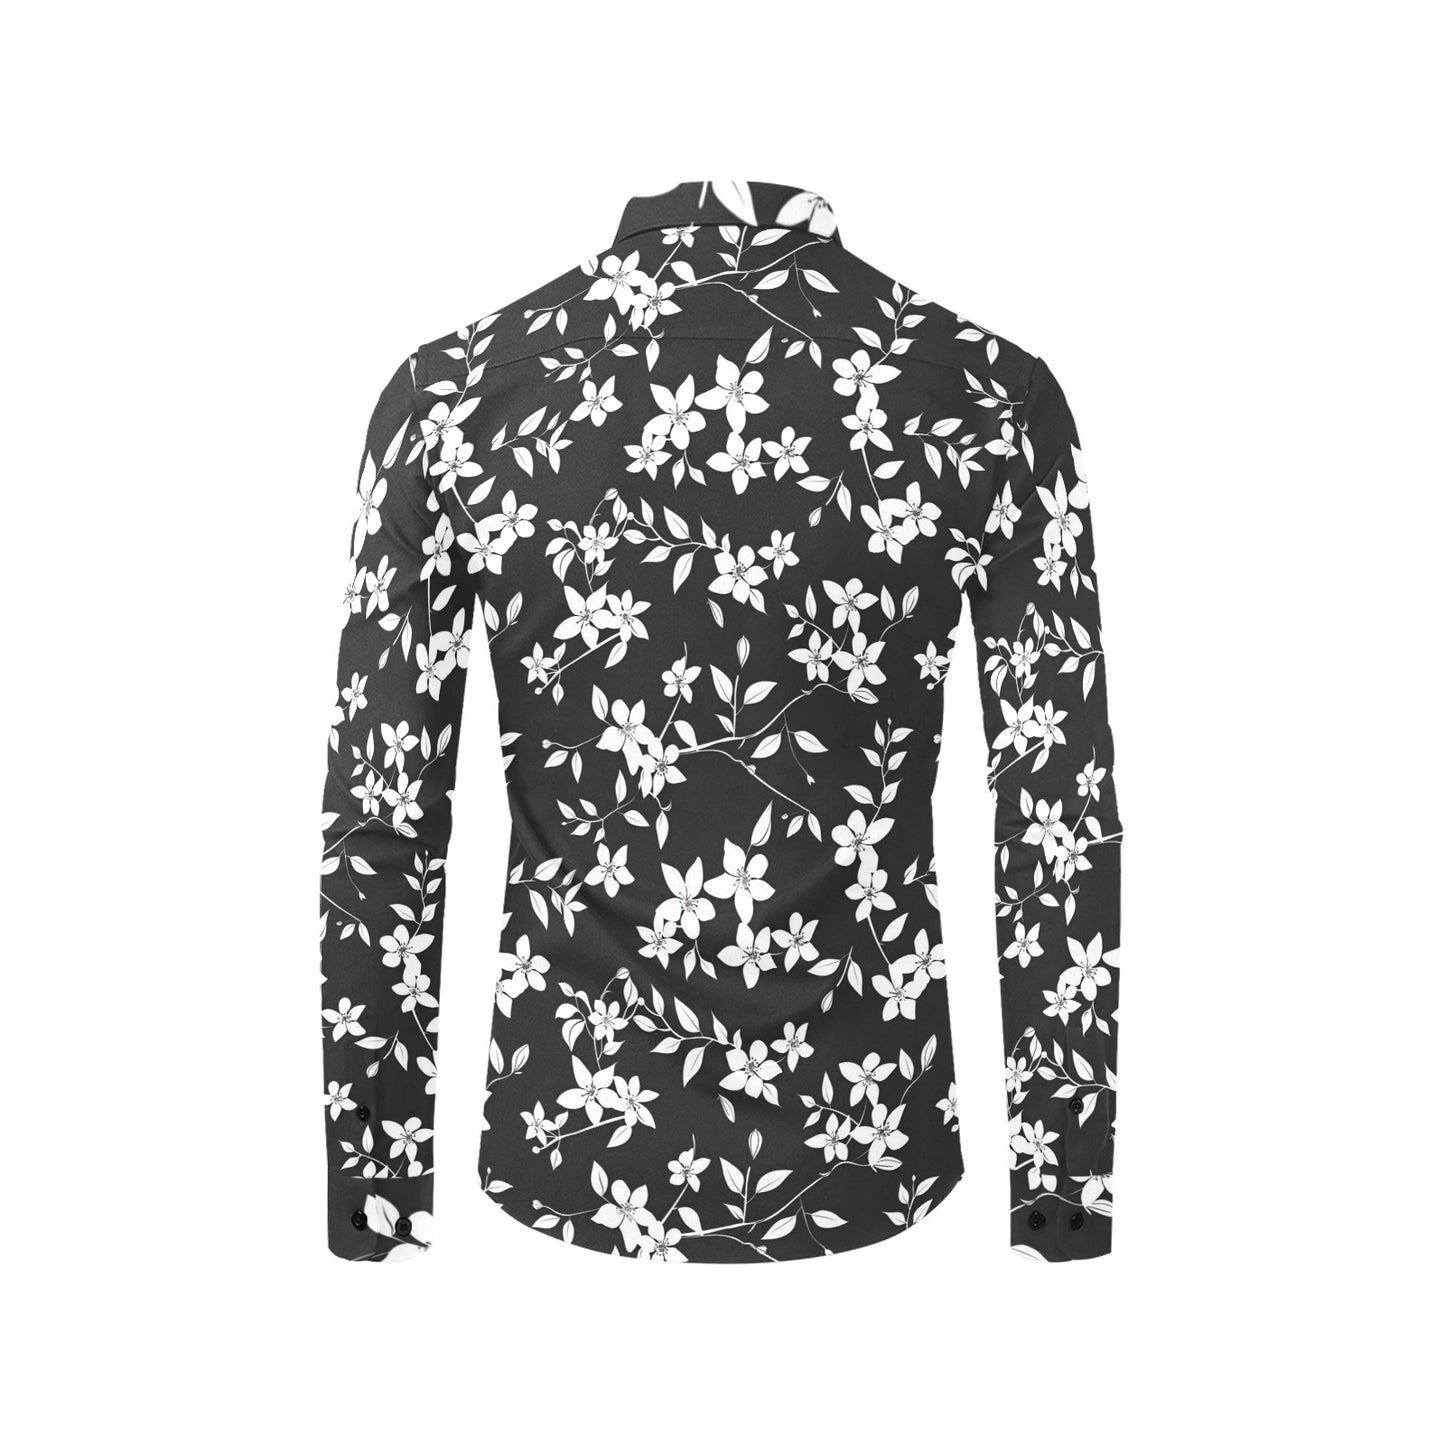 Black and White Floral Long Sleeve Men Button Up Shirt, Flowers Summer Print Dress Buttoned Collar Casual Male Guy Plus Size Shirt